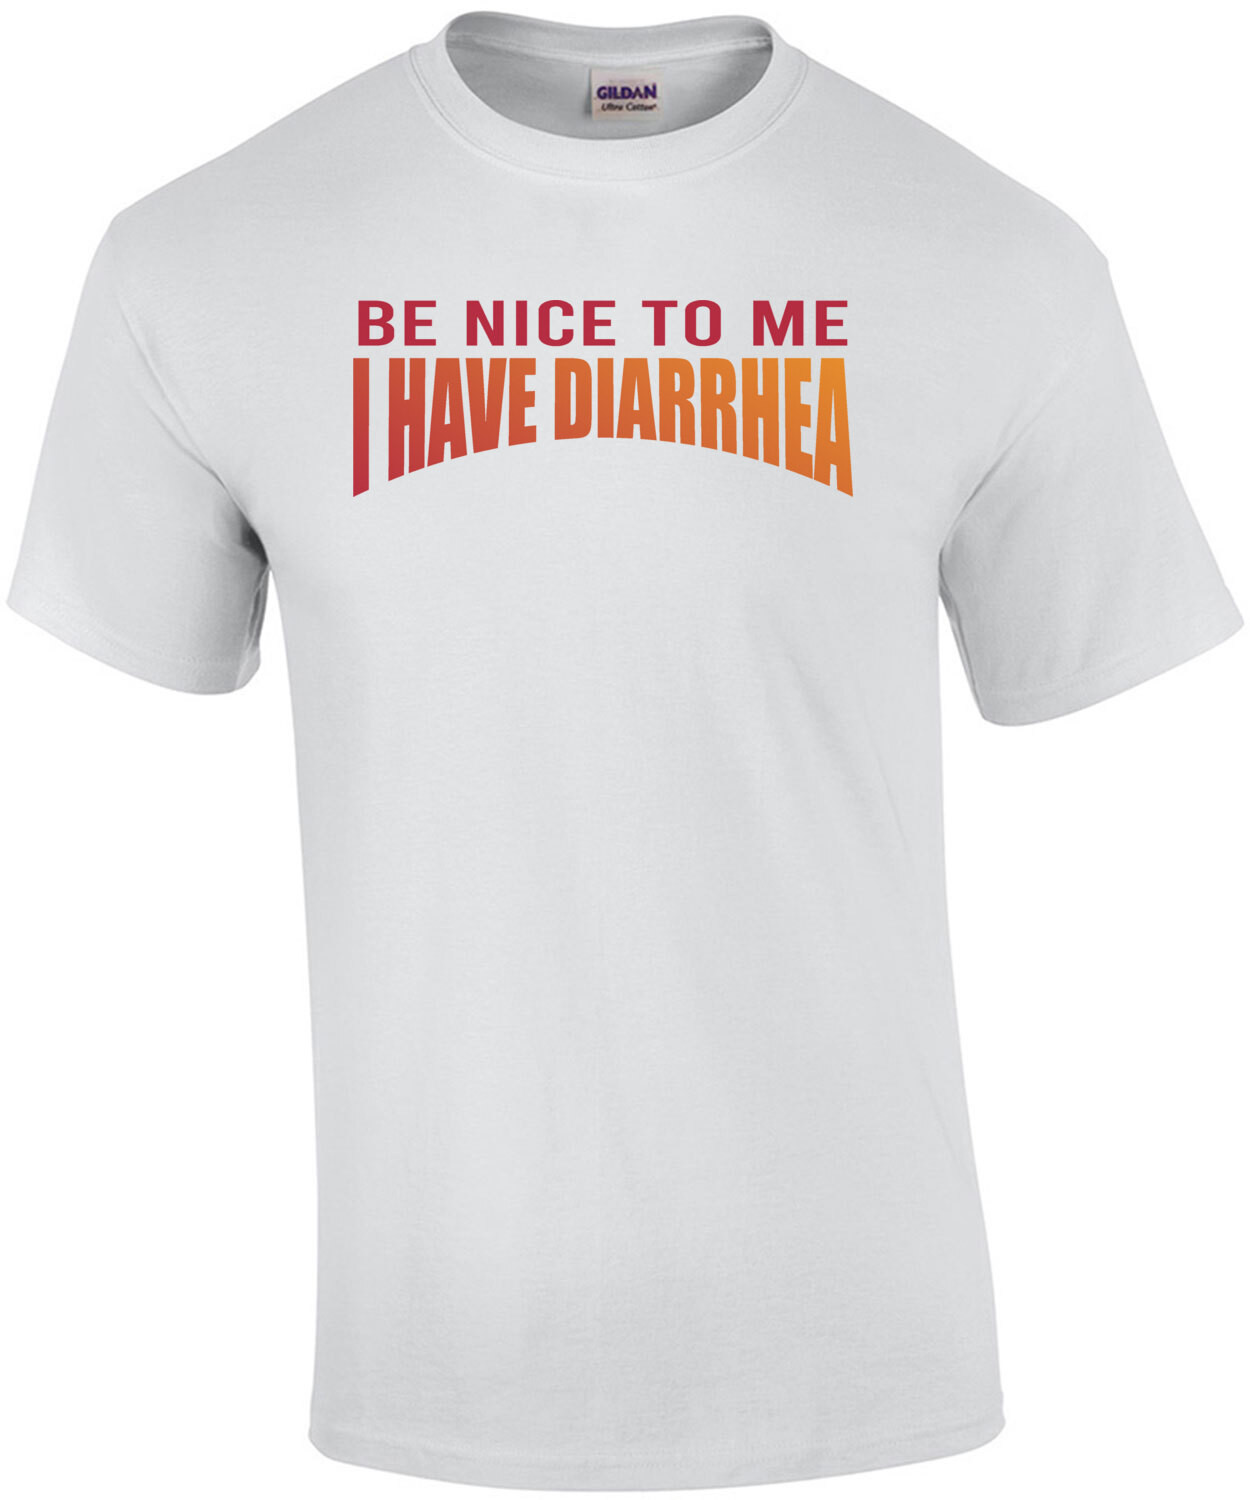 Be nice to me I have diarrhea - funny t-shirt